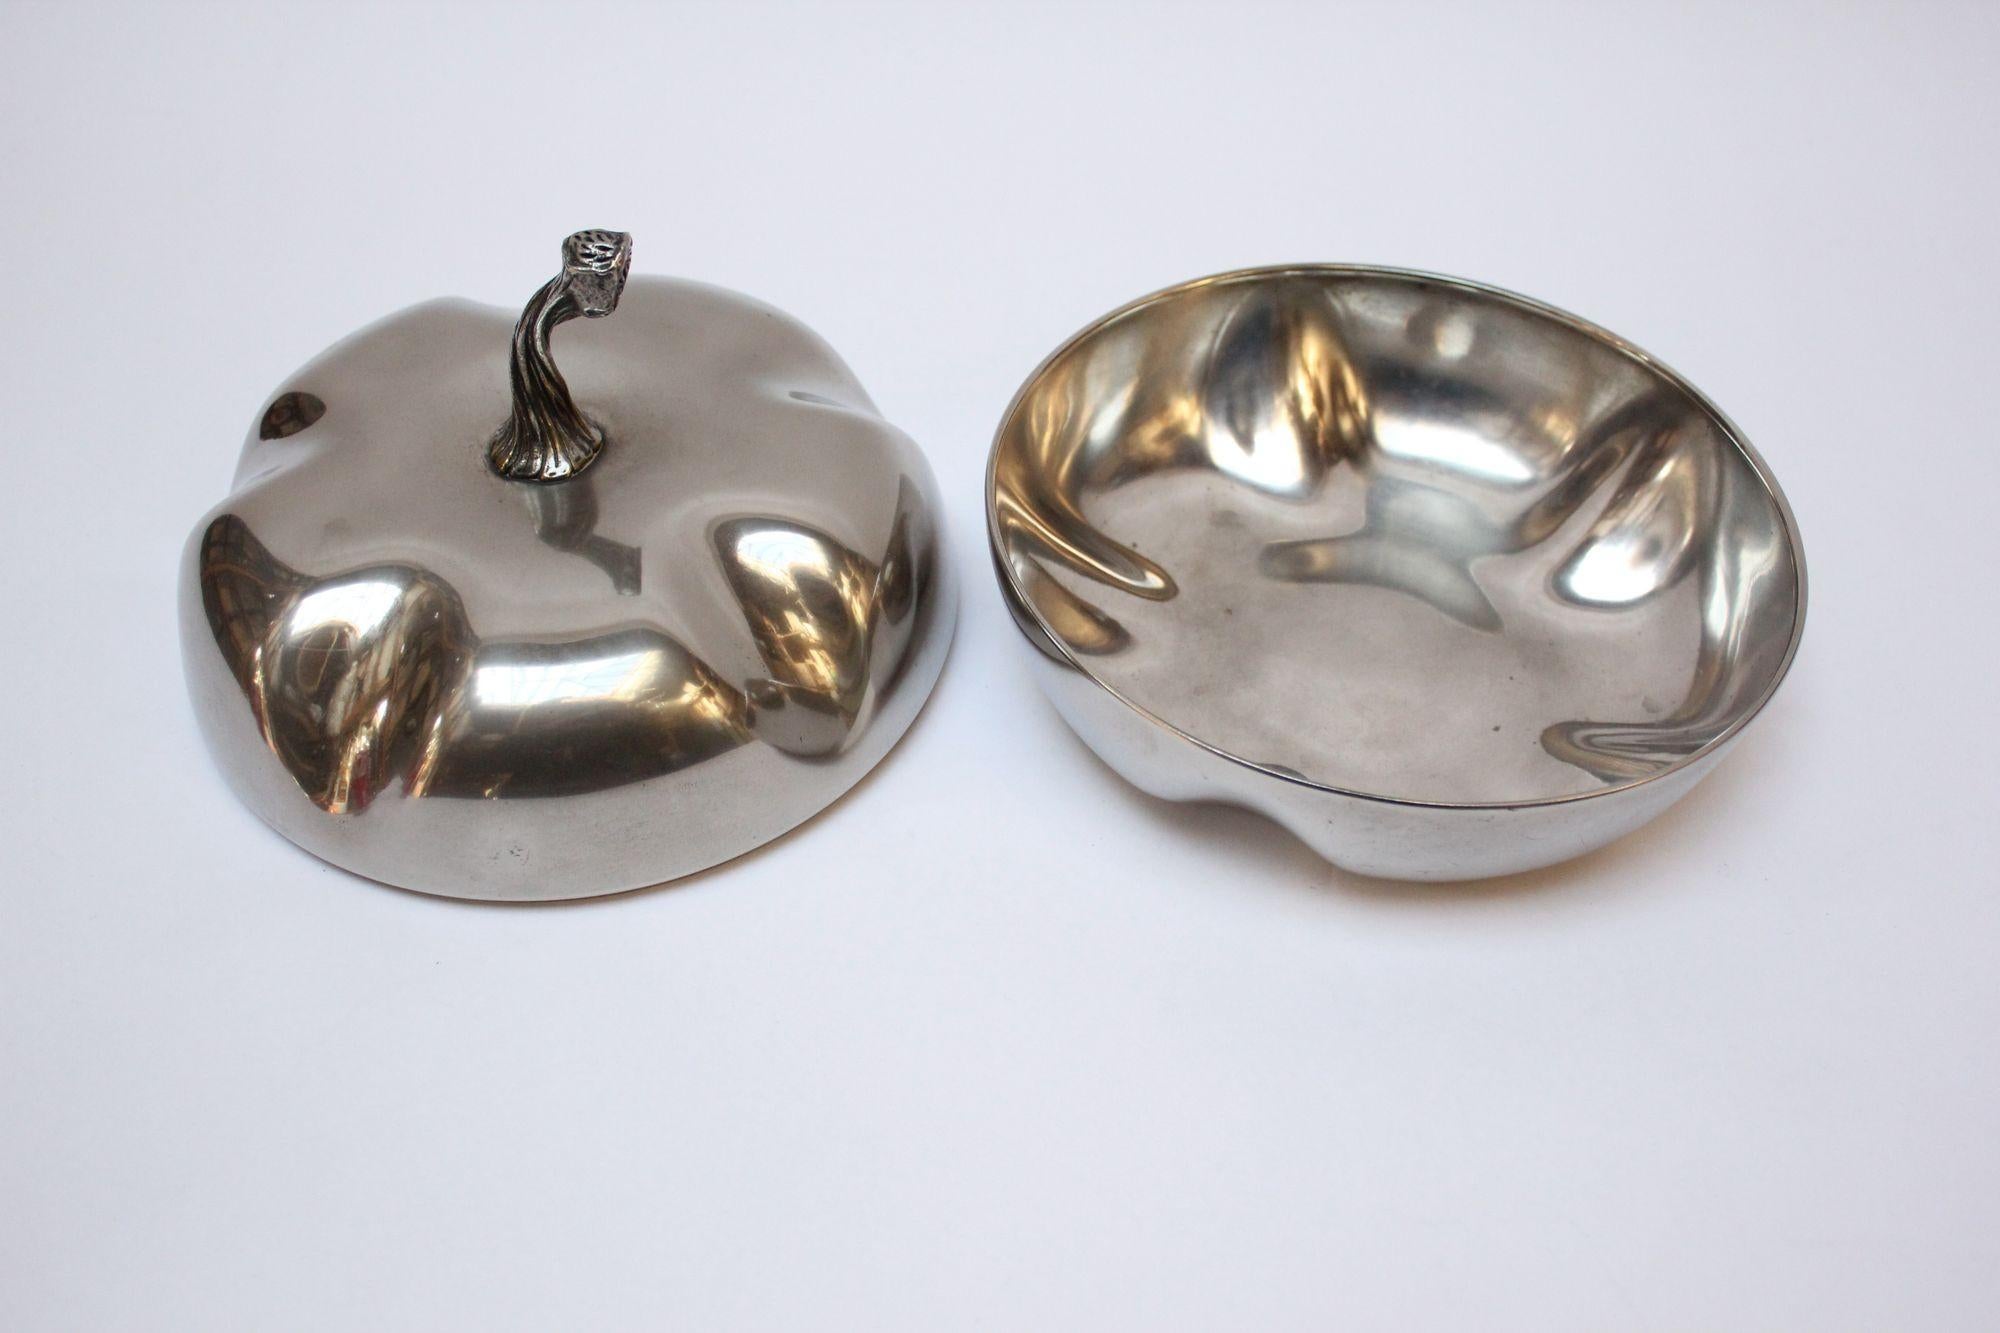 Mid-Century Italian Modern silver-plated snack/candy/serving dish with lidded top formed to resemble a squash.
This is a shorter, uninsulated version of fruit and vegetable-formed ice buckets made in Italy and France at the time.
Though shallow,